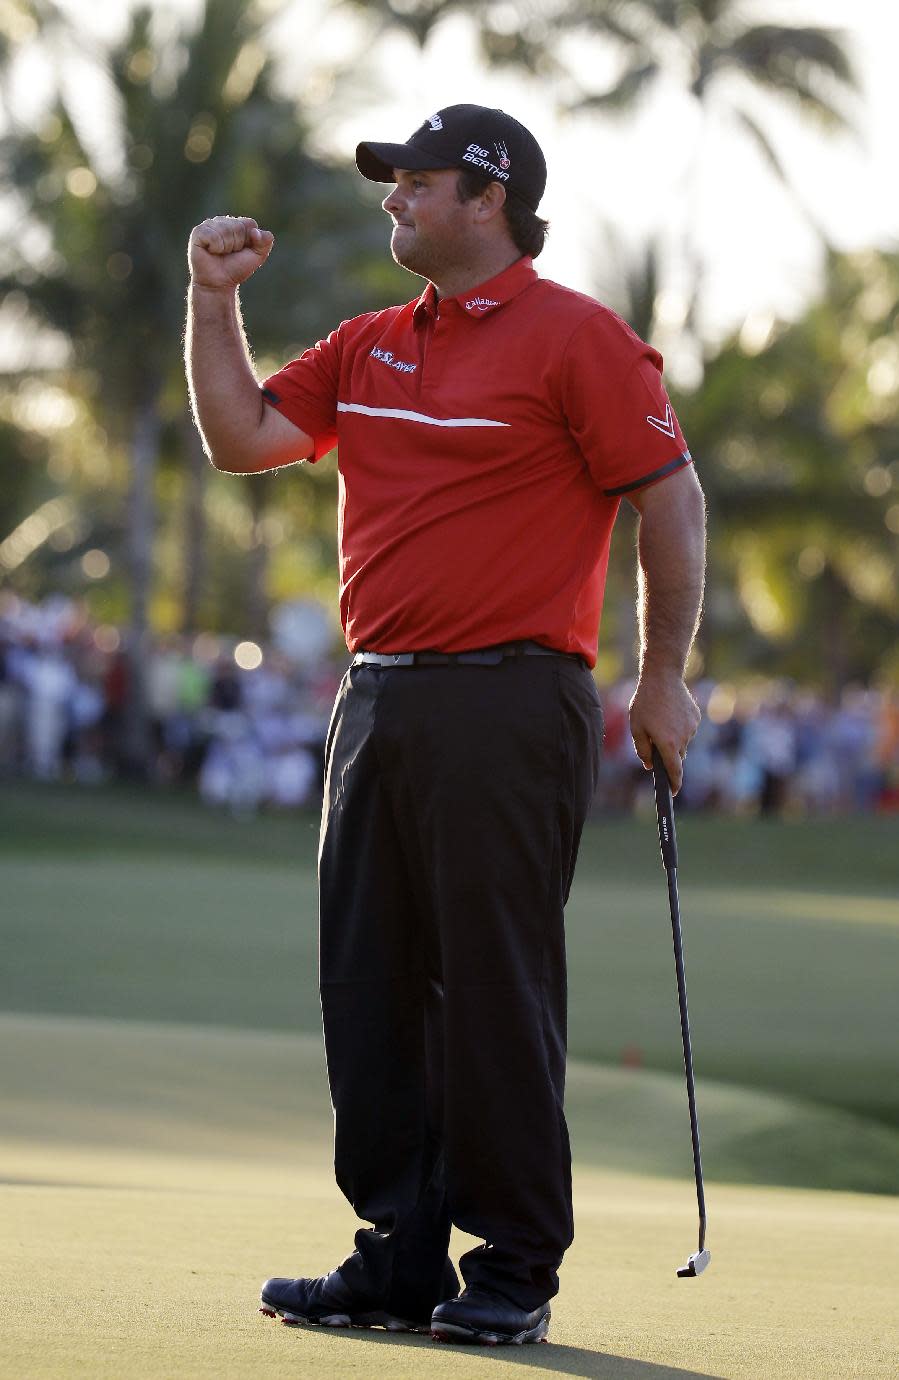 Patrick Reed celebrates his win at the Cadillac Championship golf tournament on Sunday, March 9, 2014, in Doral, Fla. (AP Photo/Lynne Sladky)